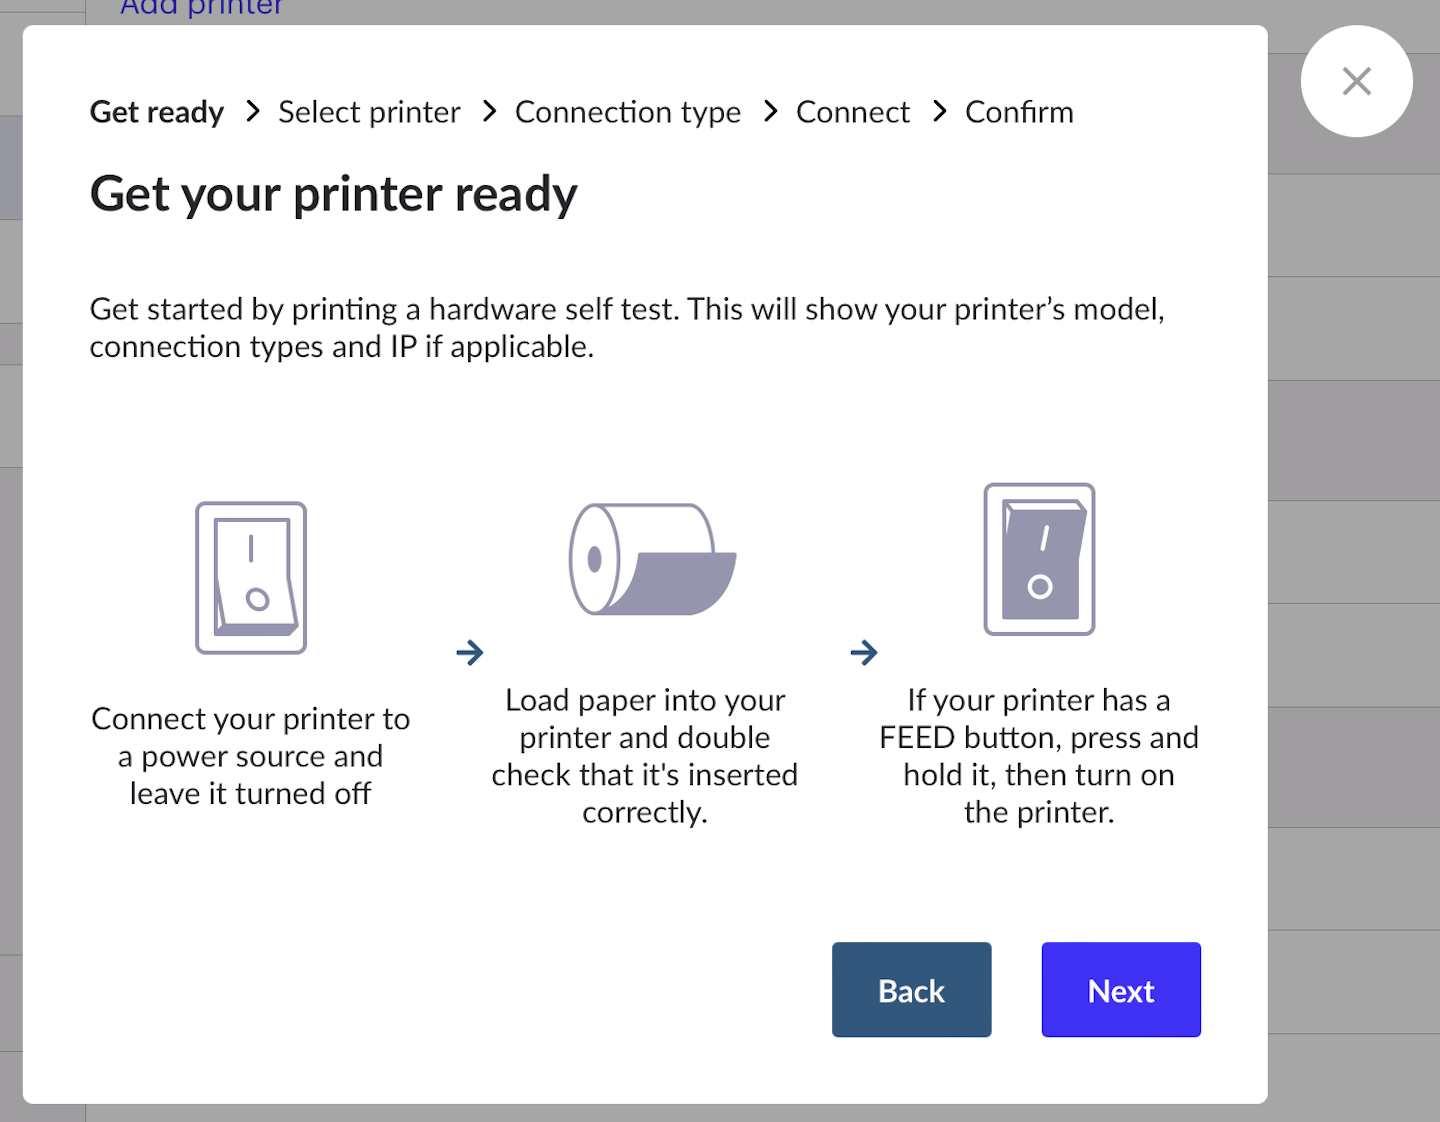 Pop-up listing steps required for the hardware self-test. 1. Connect the printer to a power source and leave it turned off. 2. Load paper into the printer. 3. If the printer has a Feed button, press and hold it, then turn on the printer.